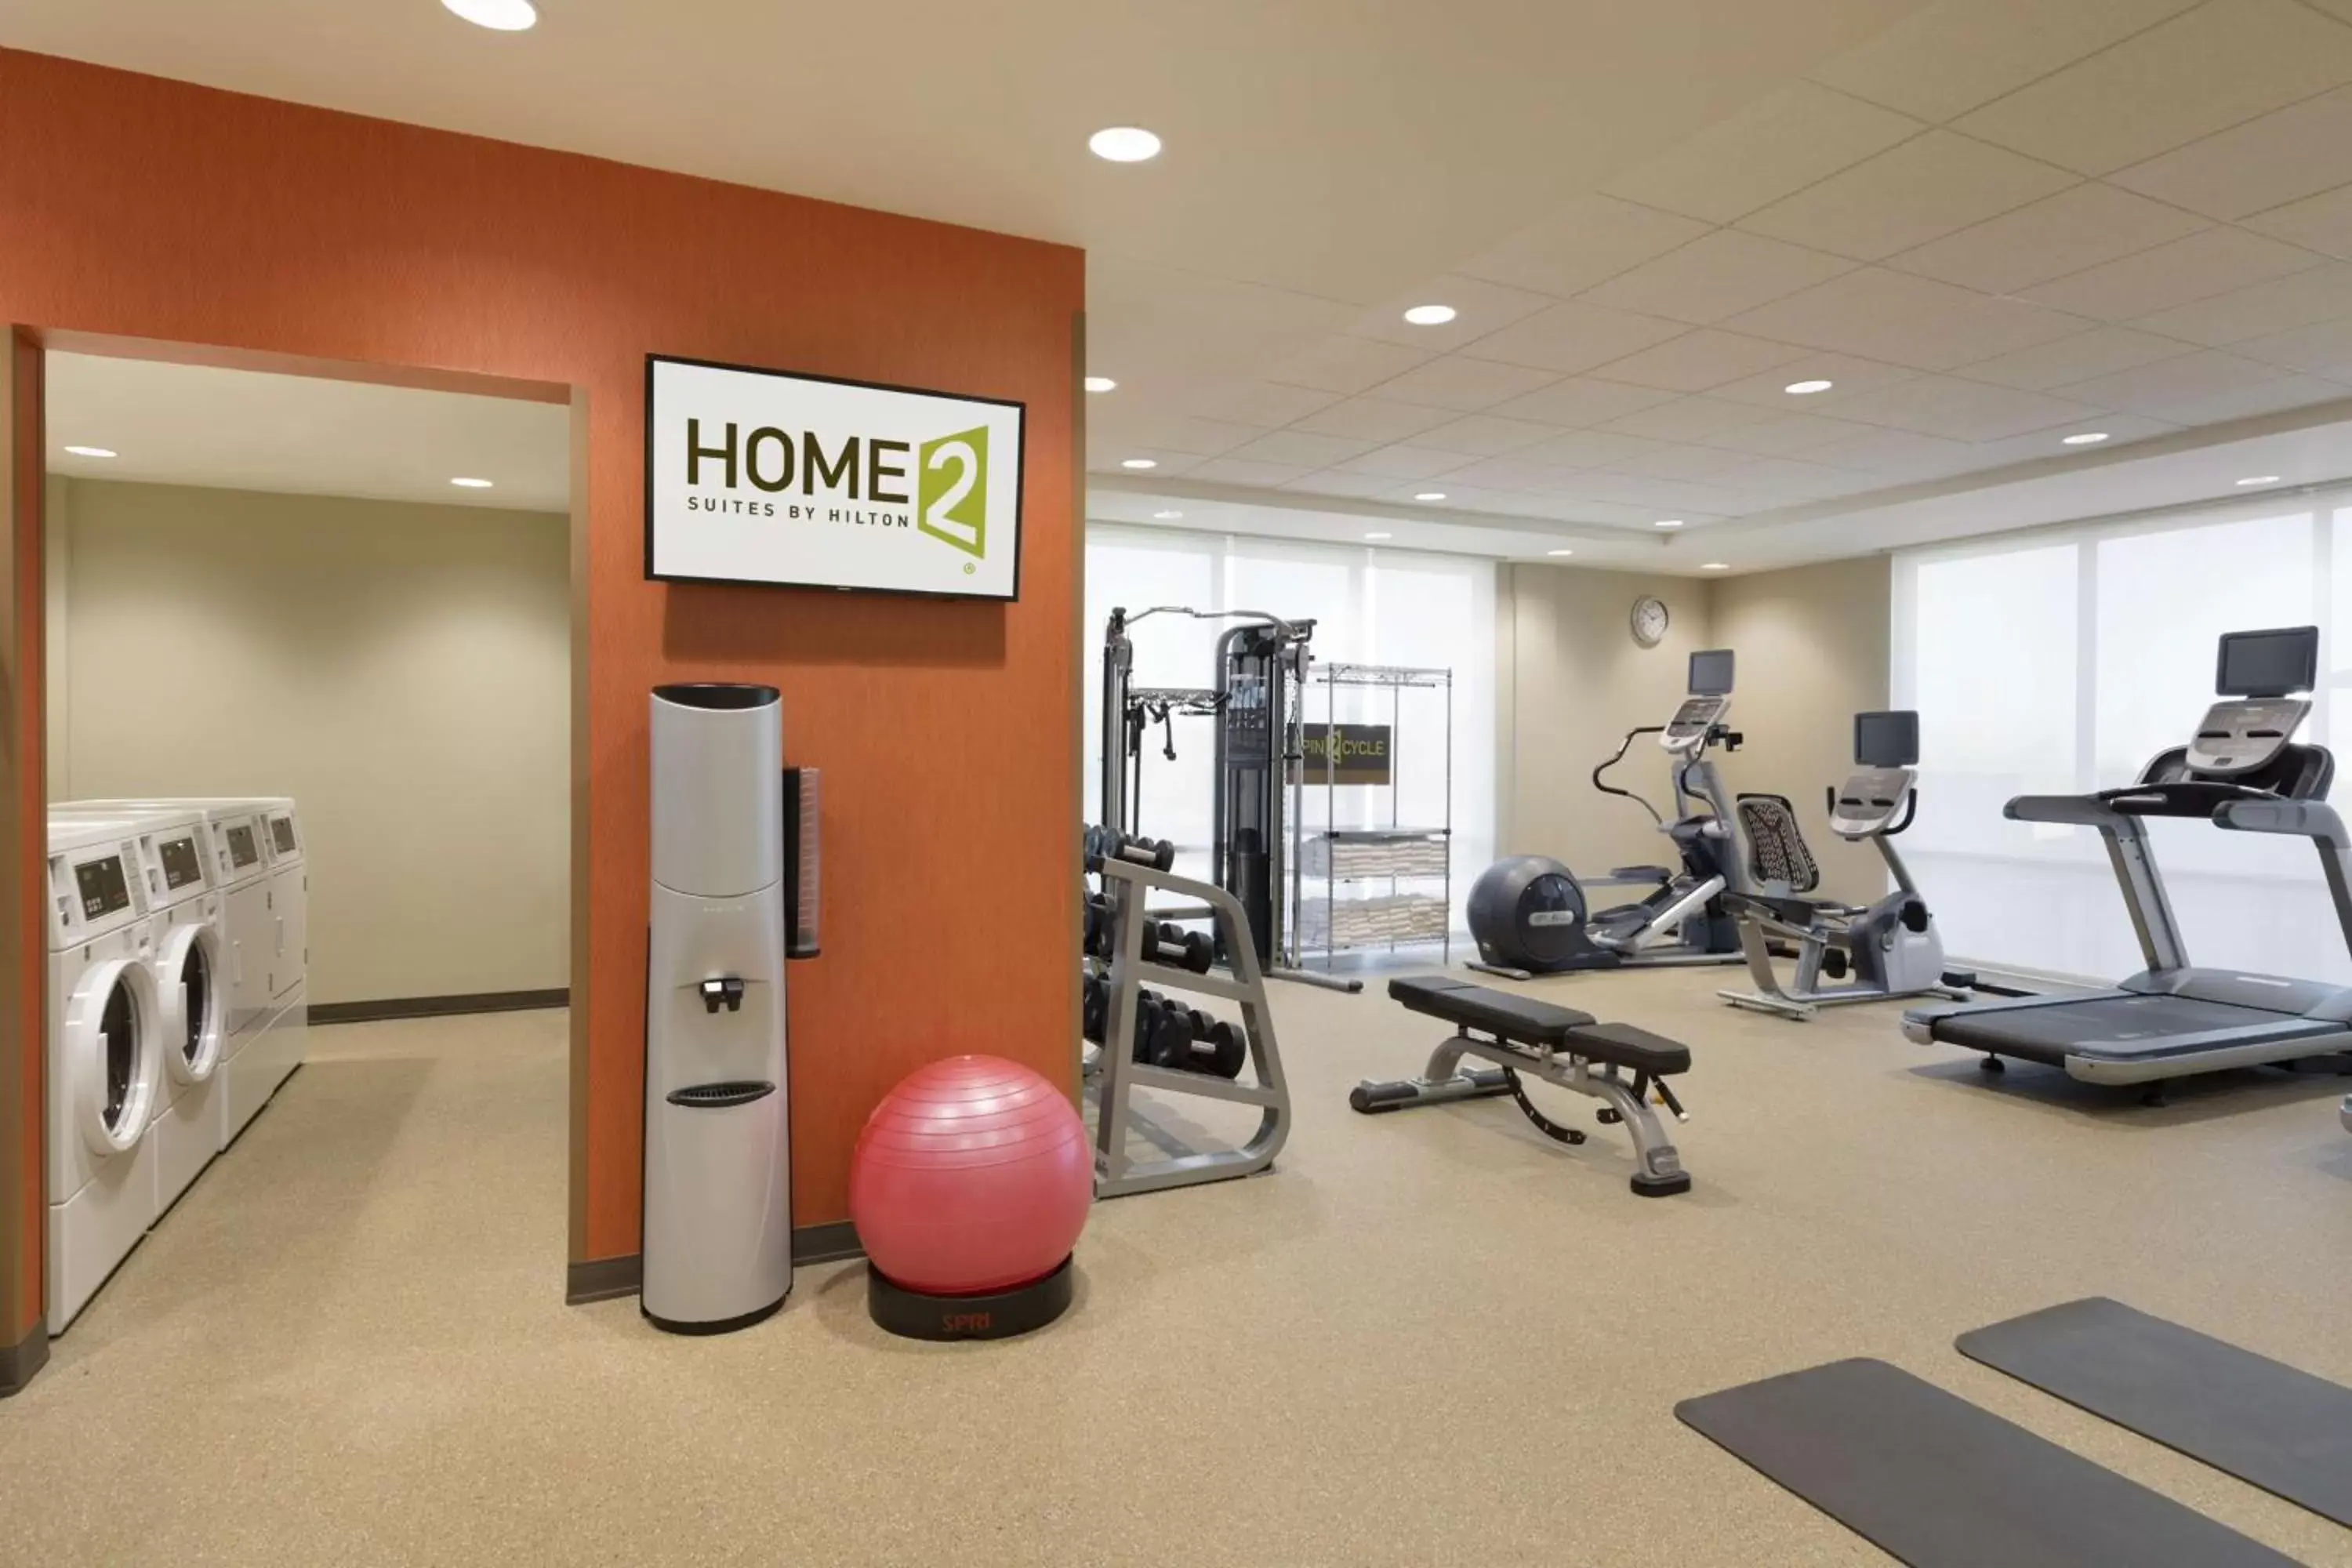 Fitness centre/facilities, Fitness Center/Facilities in Home2 Suites by Hilton Grovetown Augusta Area